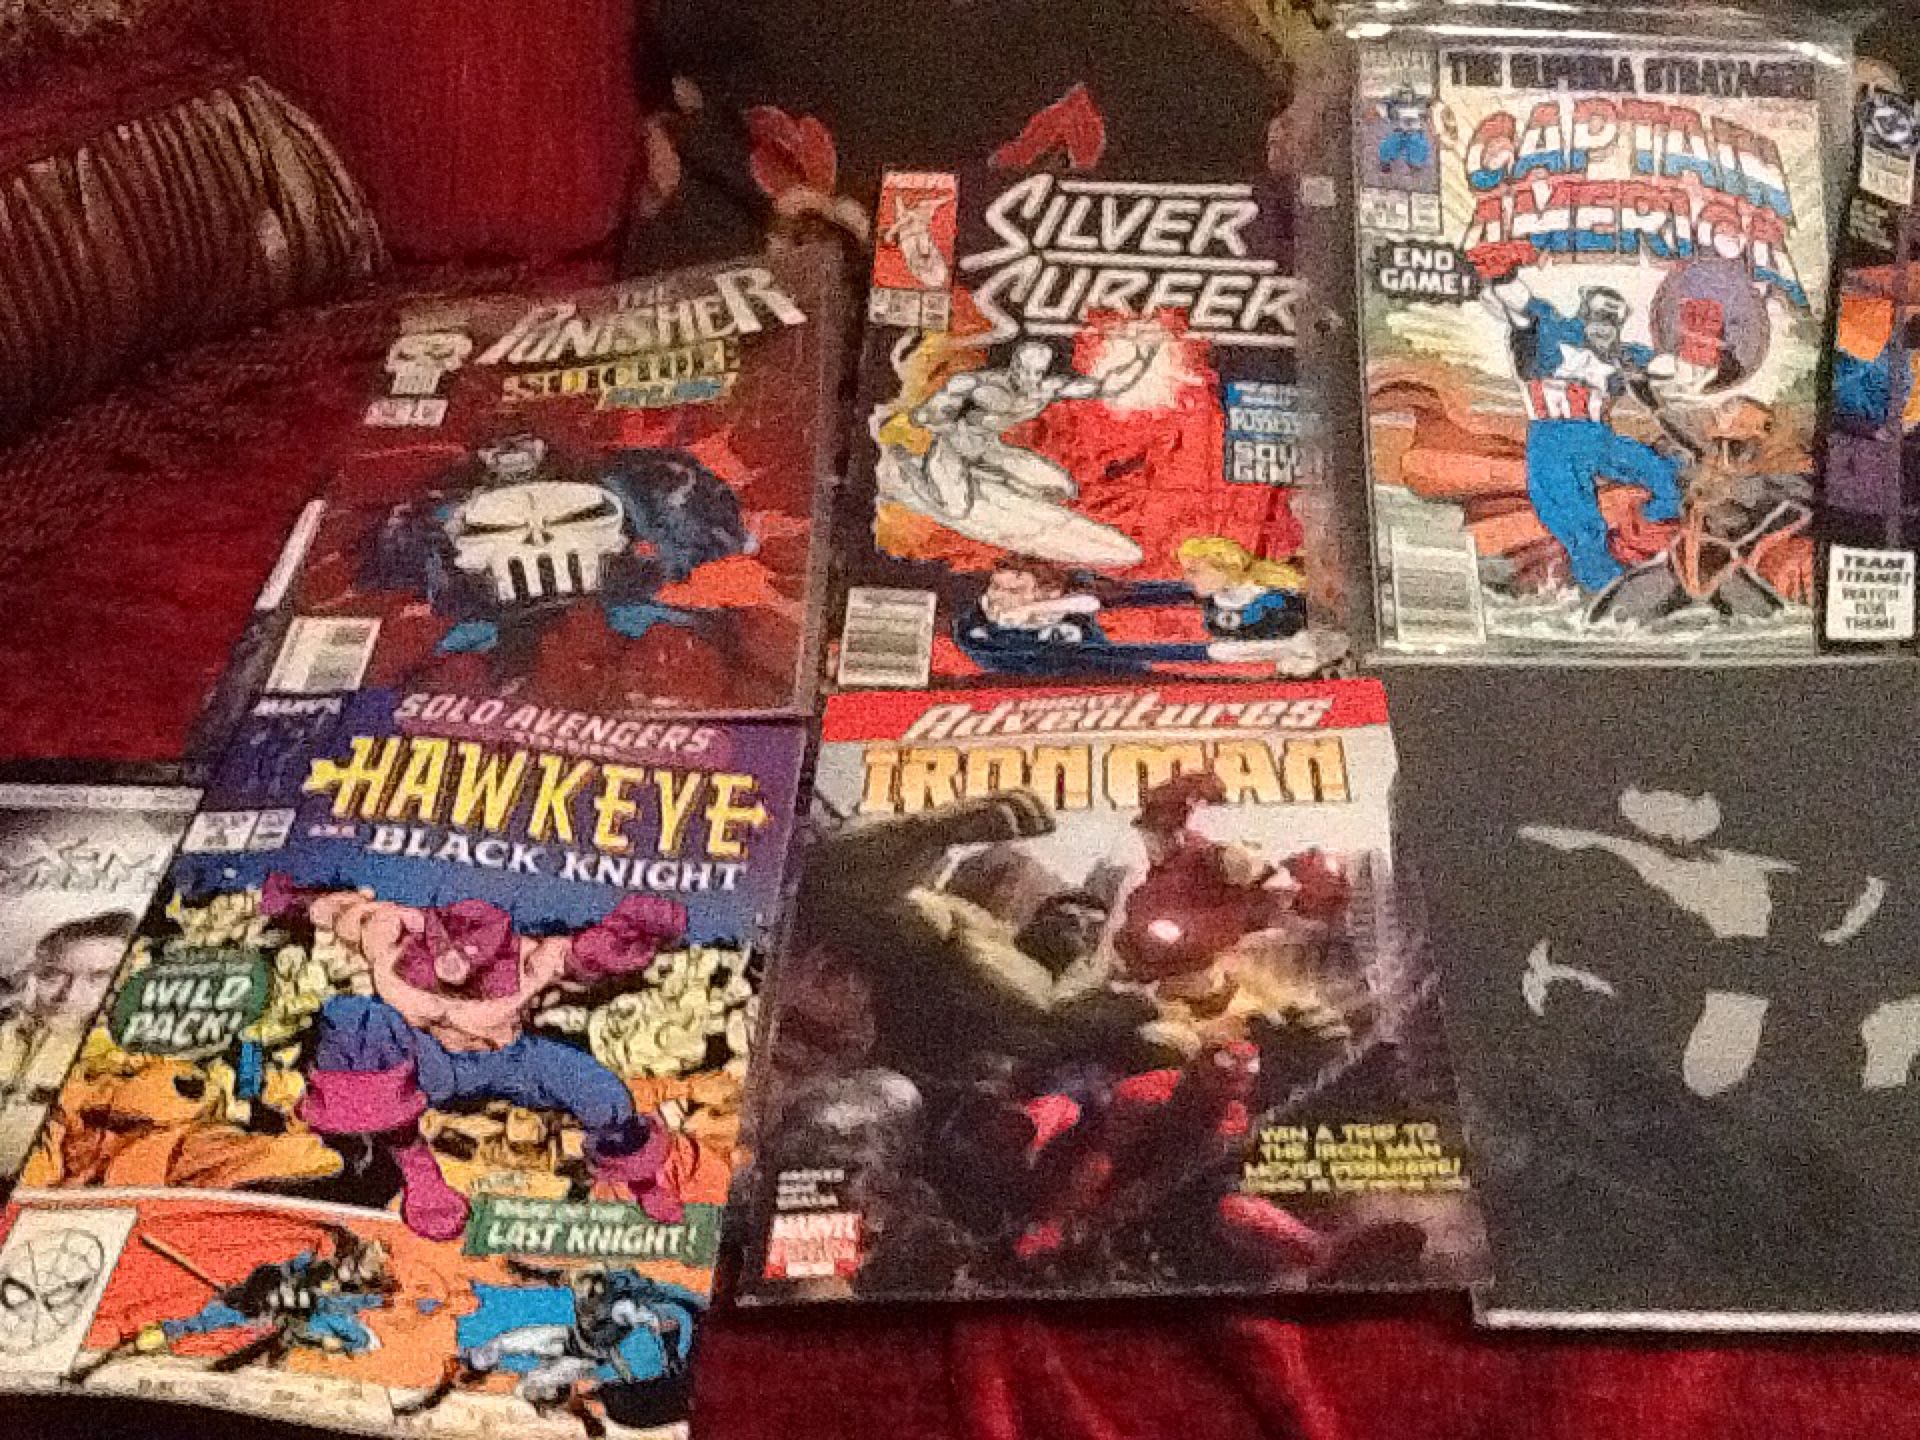 Comics and cards dc marvel and other see my offers over 4000 to pick from $2 e